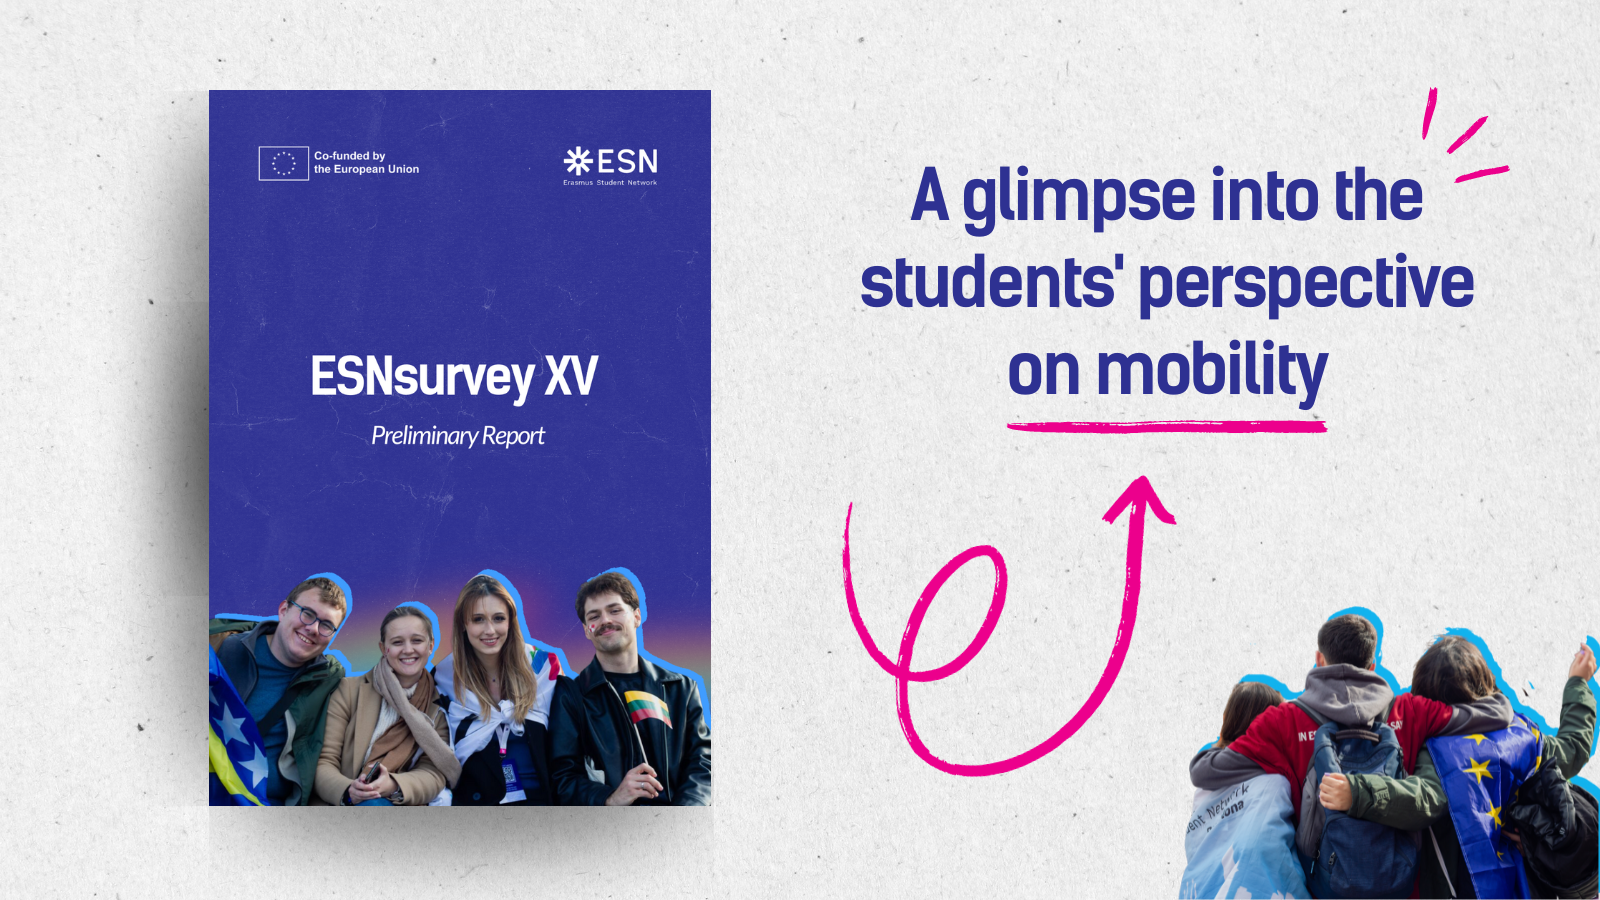 The cover of ESNsurvey XV Preliminary Report and text: "A glimpse into the students' perspective on mobility."